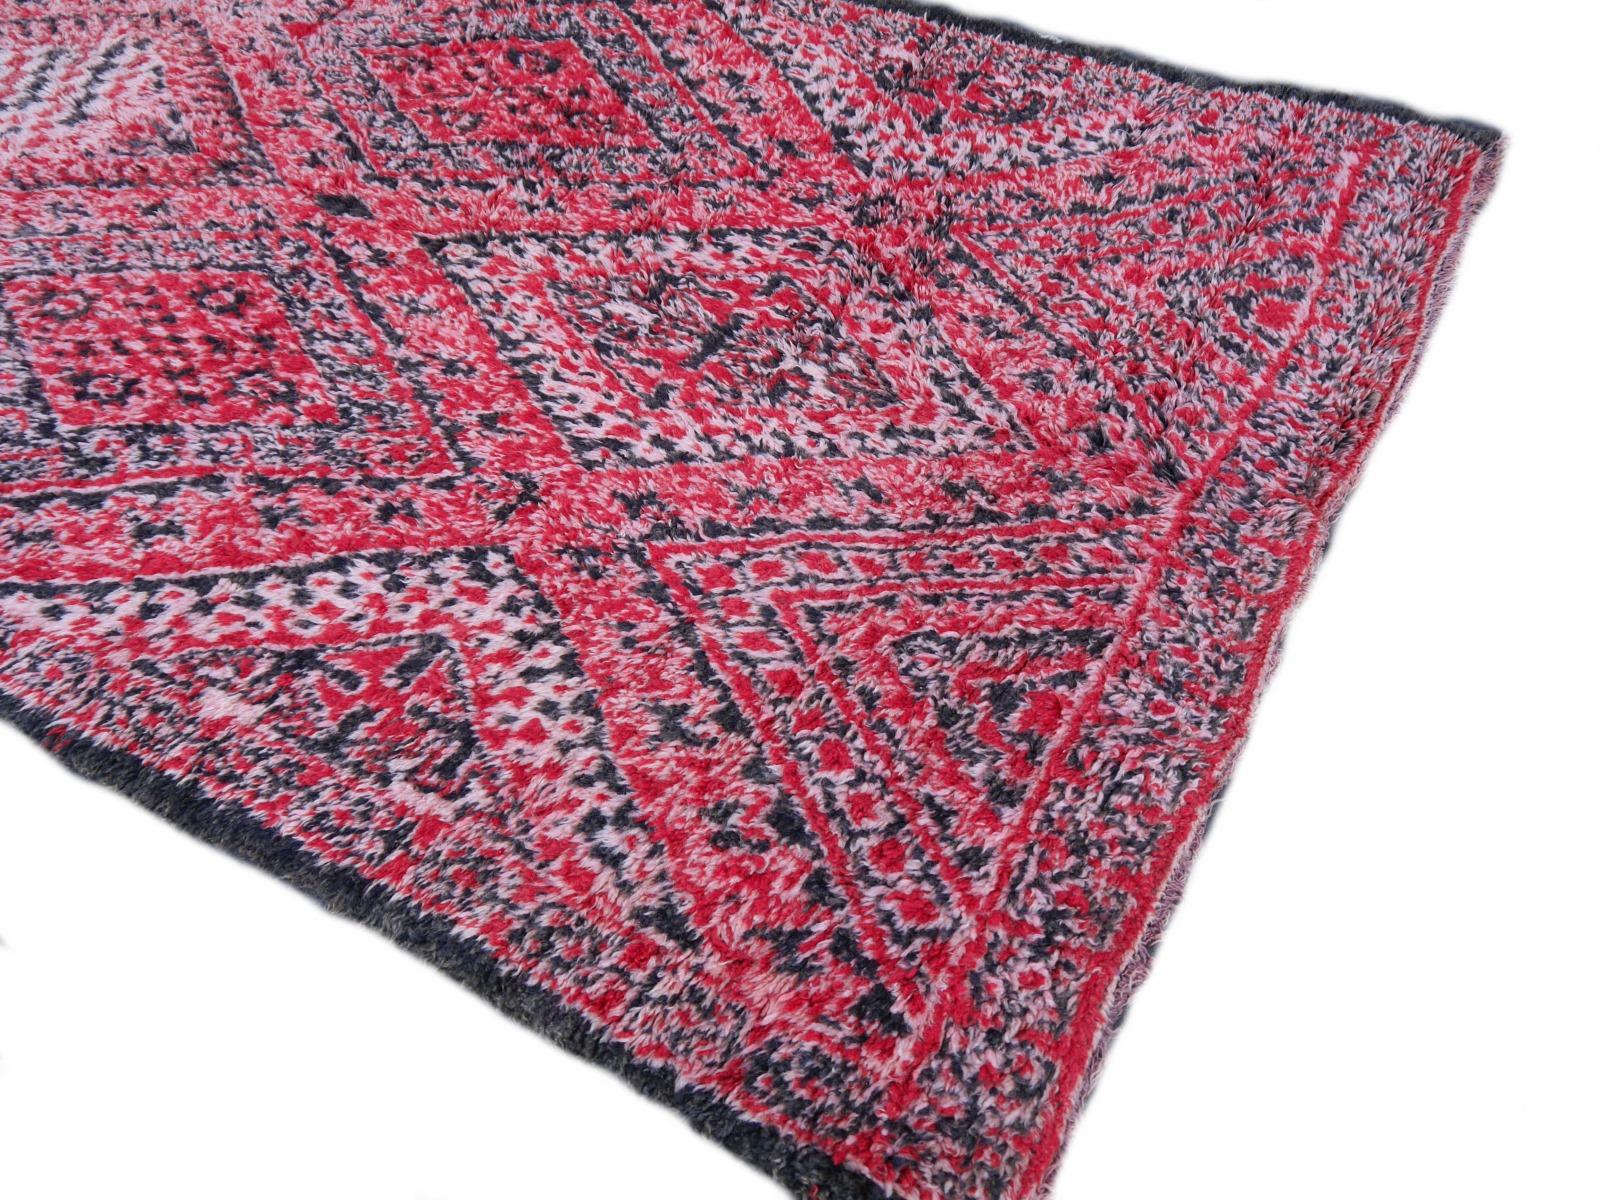 Moroccan Vintage Rug North African Diamond Design Wool Red Pink Charcoal White For Sale 9